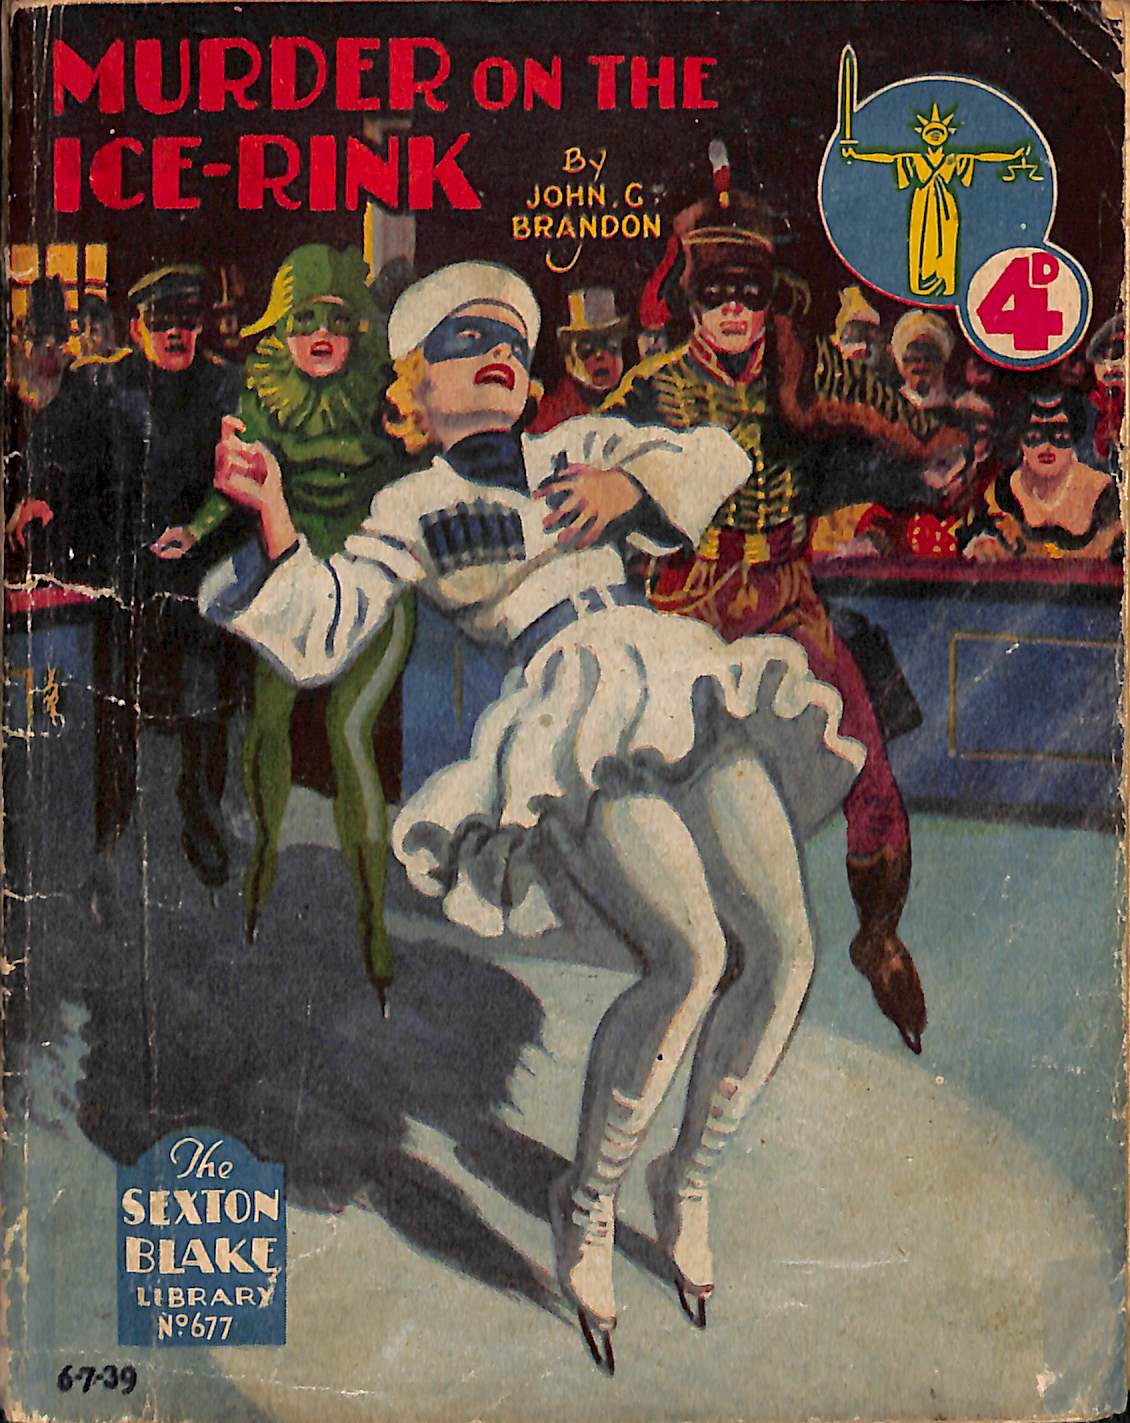 Comic Book Cover For Sexton Blake Library S2 677 - Murder On the Ice-Rink